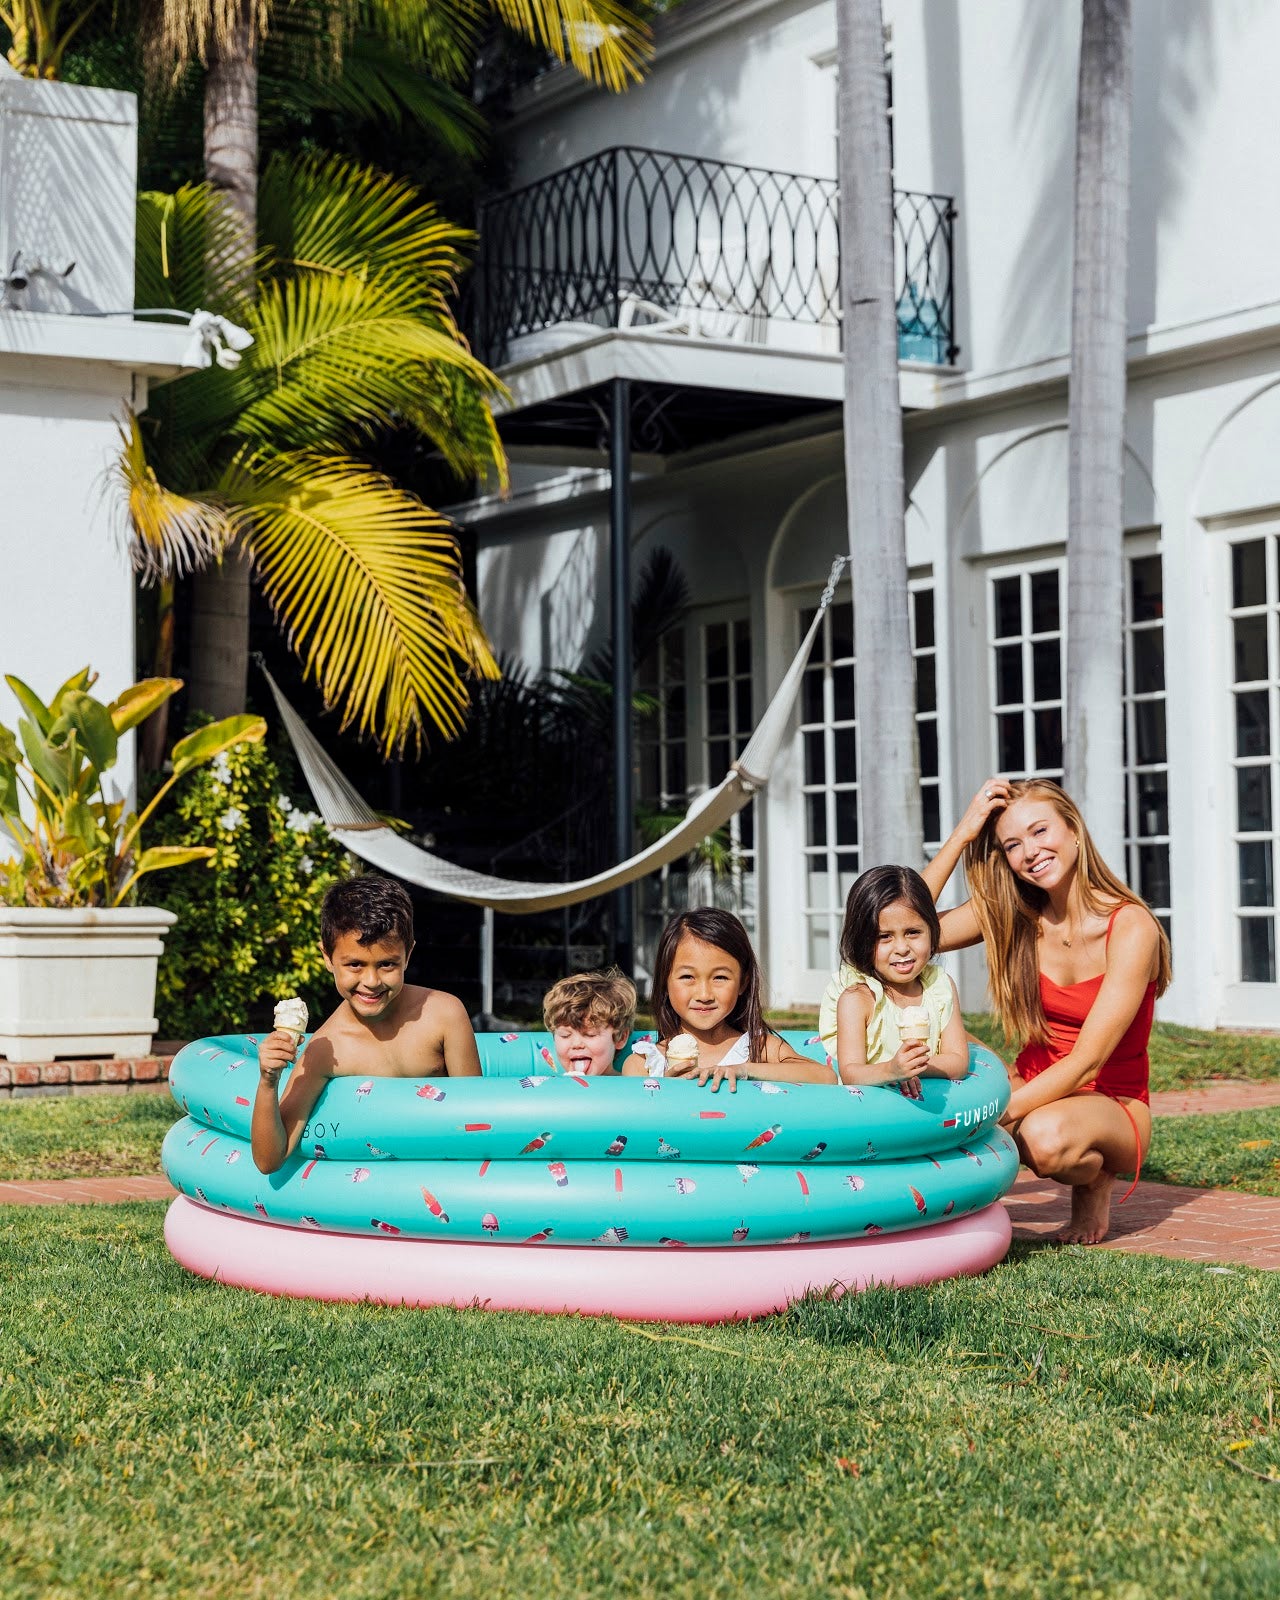 What's The Best Way To Clean An Inflatable Kiddie Pool?